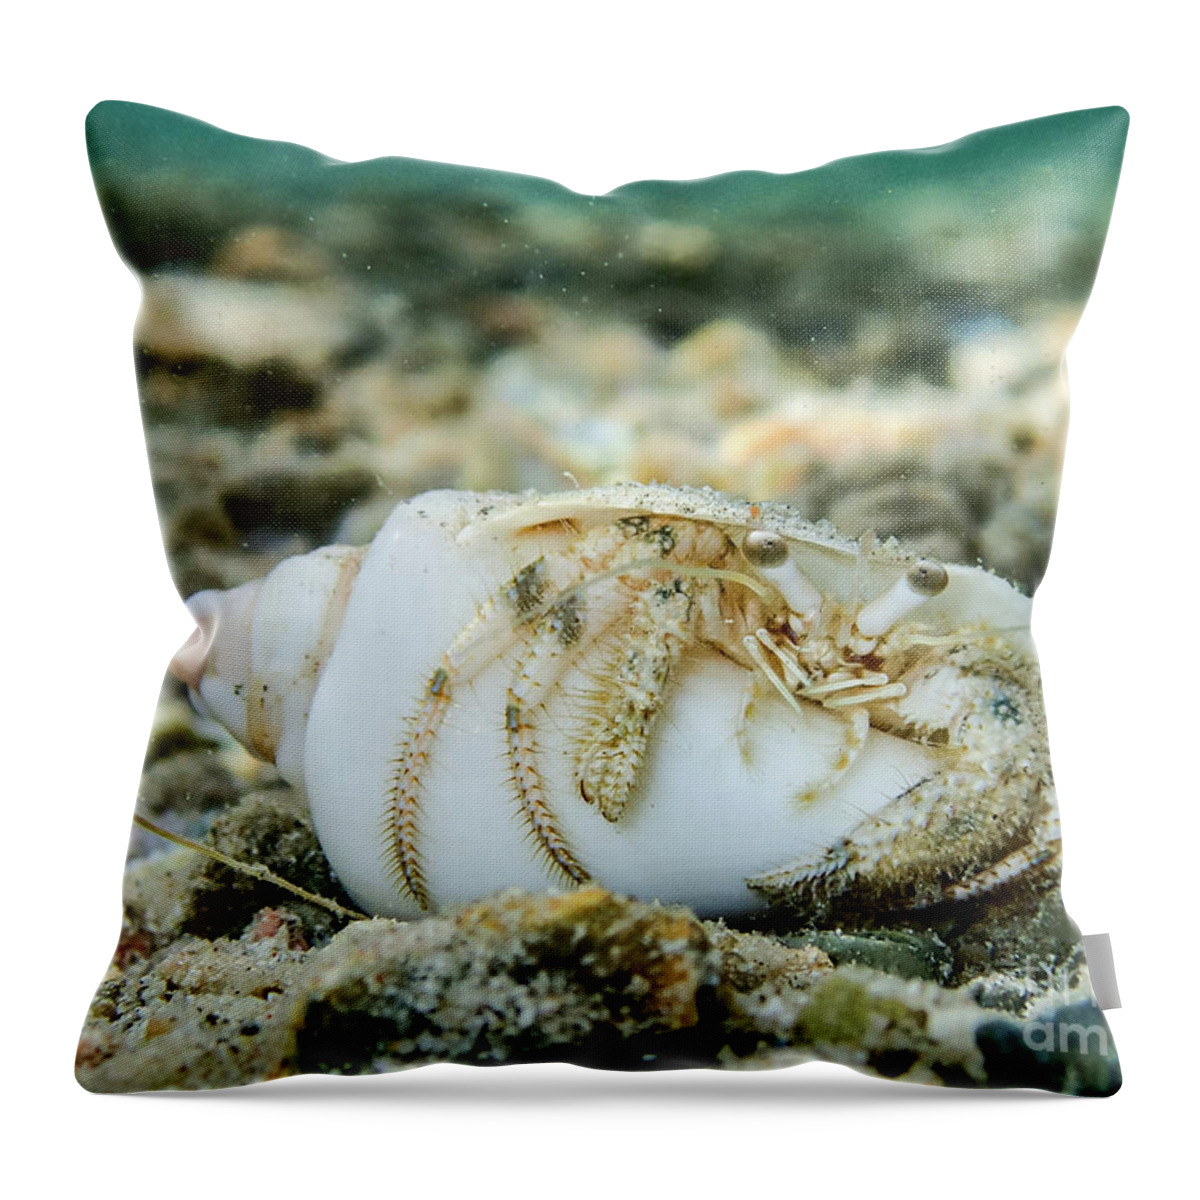 Animal Throw Pillow featuring the photograph Chilling by Hannes Cmarits